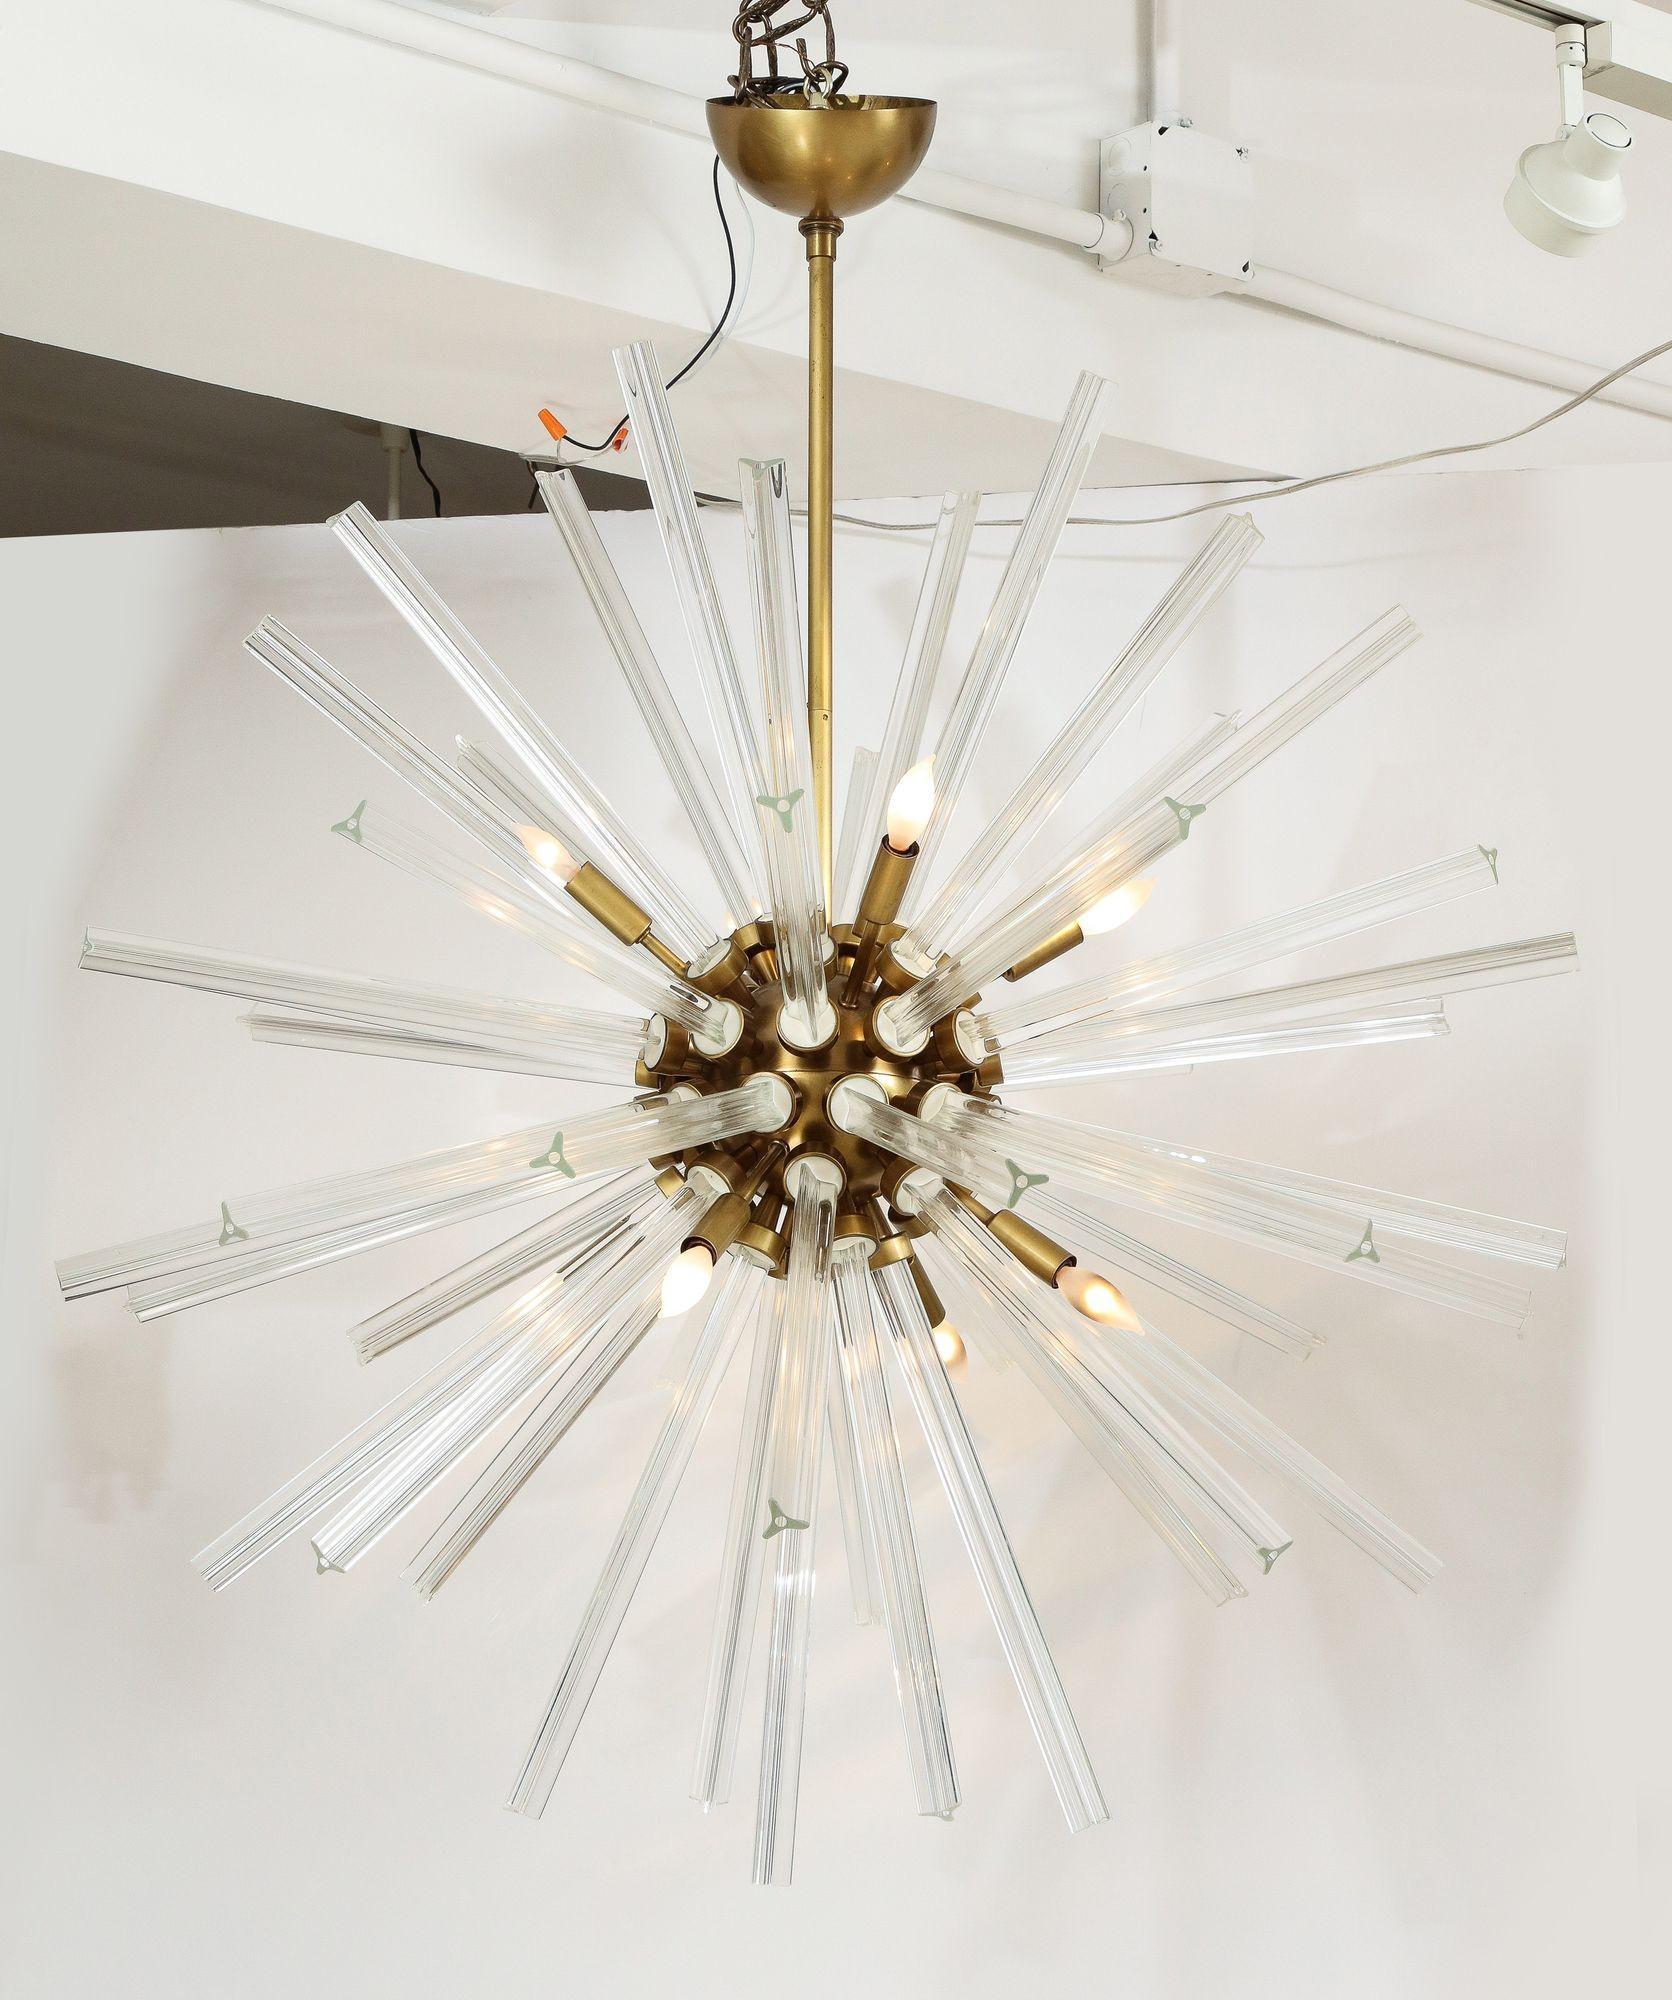 Large Crystal Sputnik Chandelier With Multi Length Rods and Brass Fittings For Sale 2